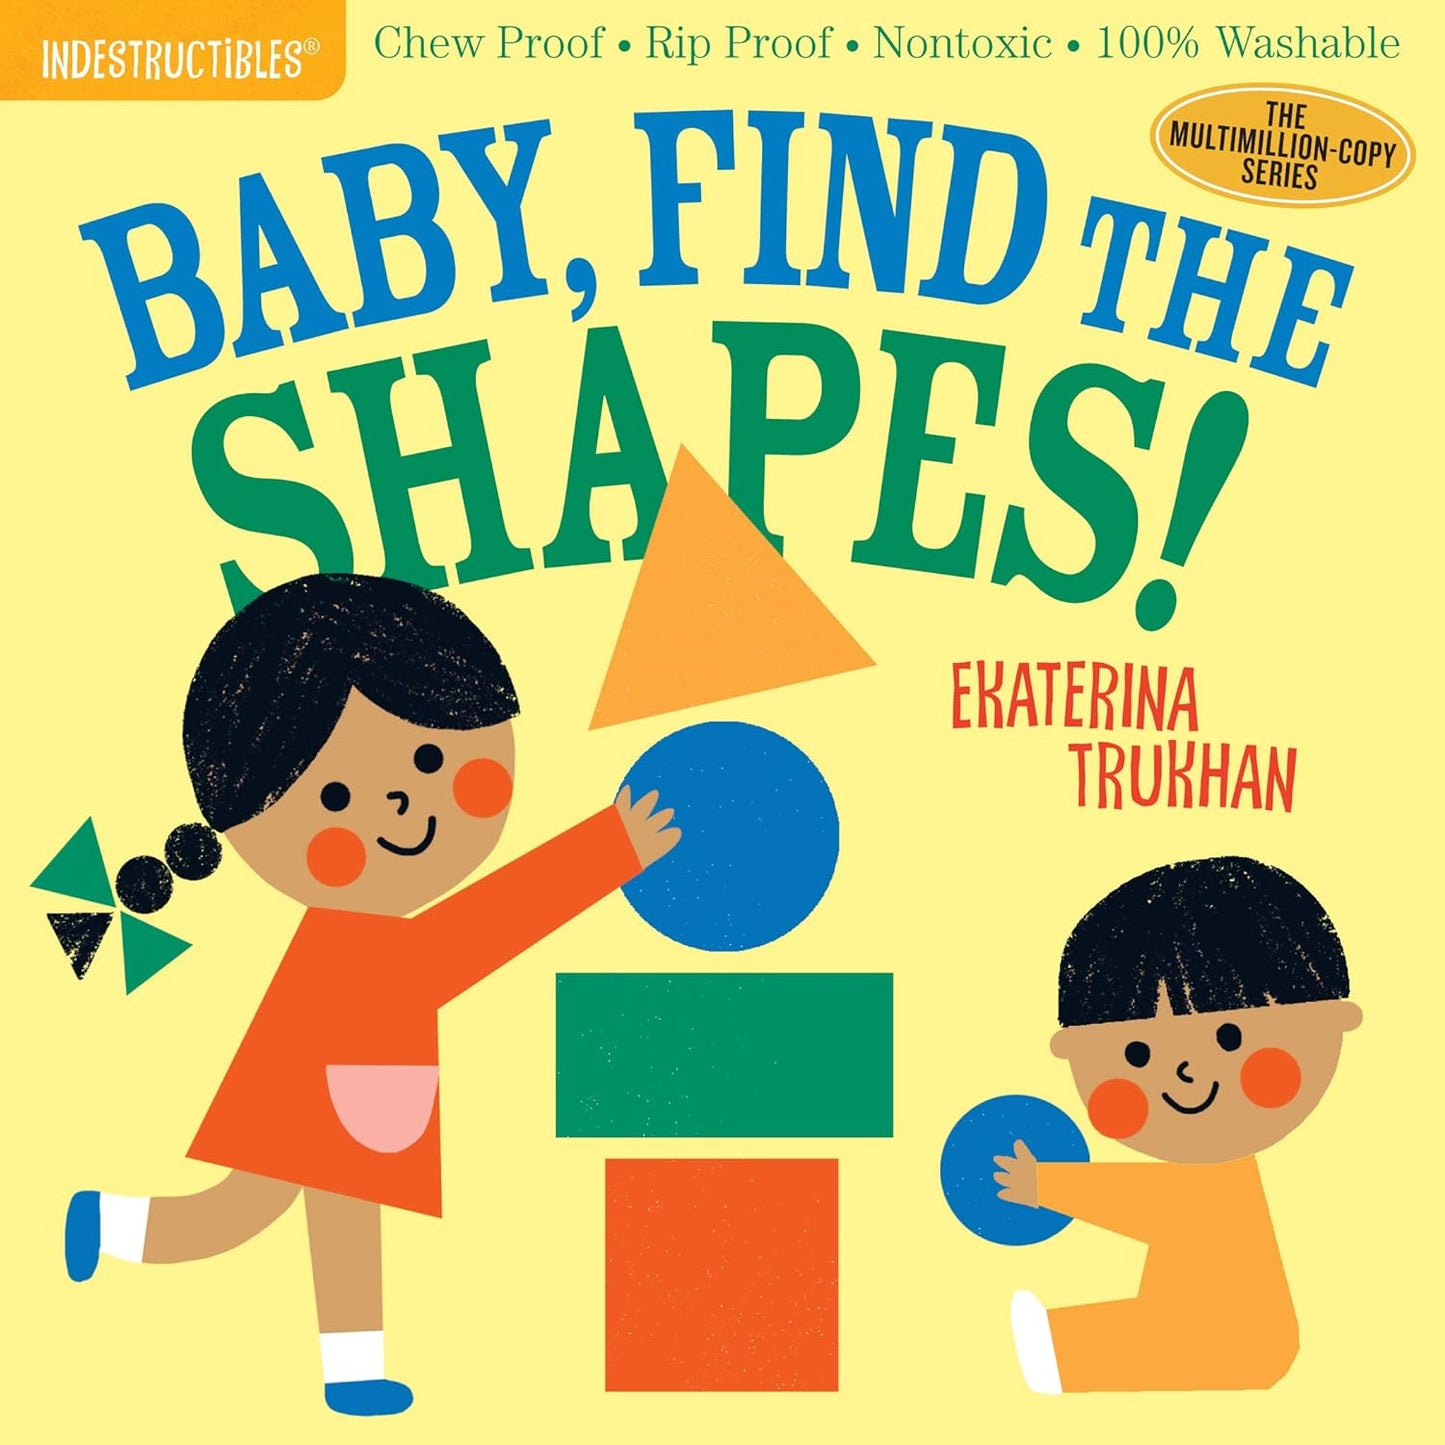 Libro Indestructible "baby find the shapes"